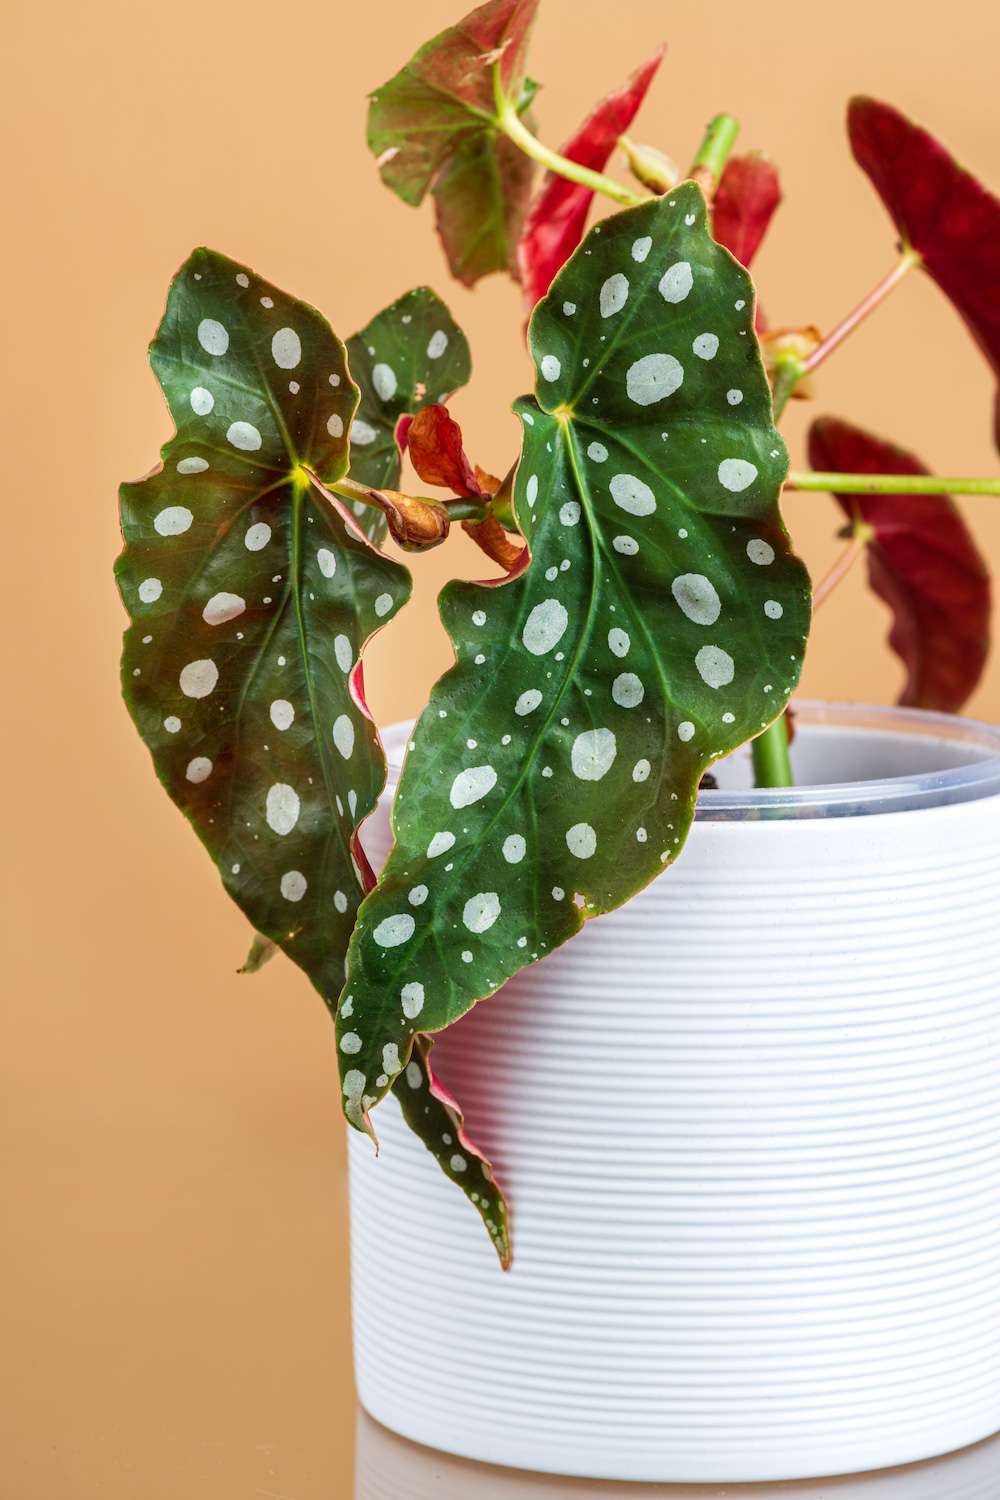 Most Popular House Plants 2022, polka dot begonia plant with dotted leaves in white planter